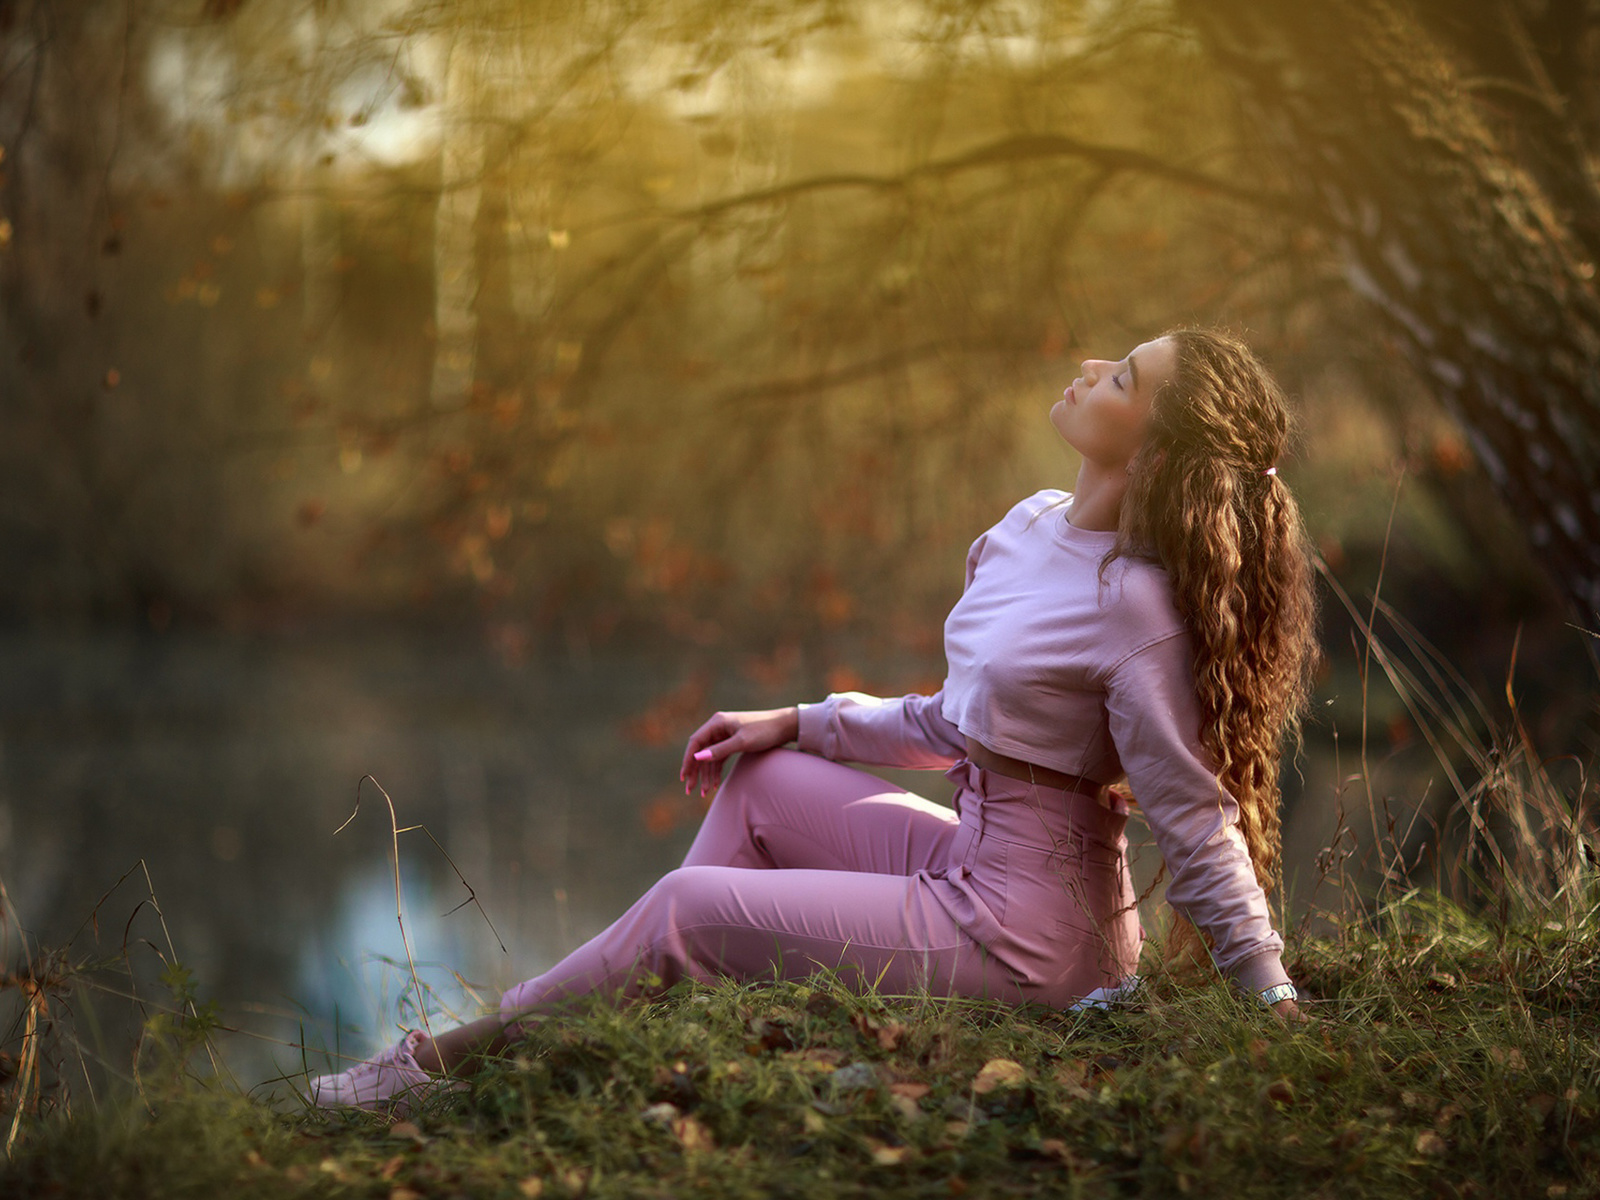 women, model, brunette, women outdoors, lake, nature, curly hair, wavy hair, sitting, sweater, pants, closed eyes, sneakers, trees, grass